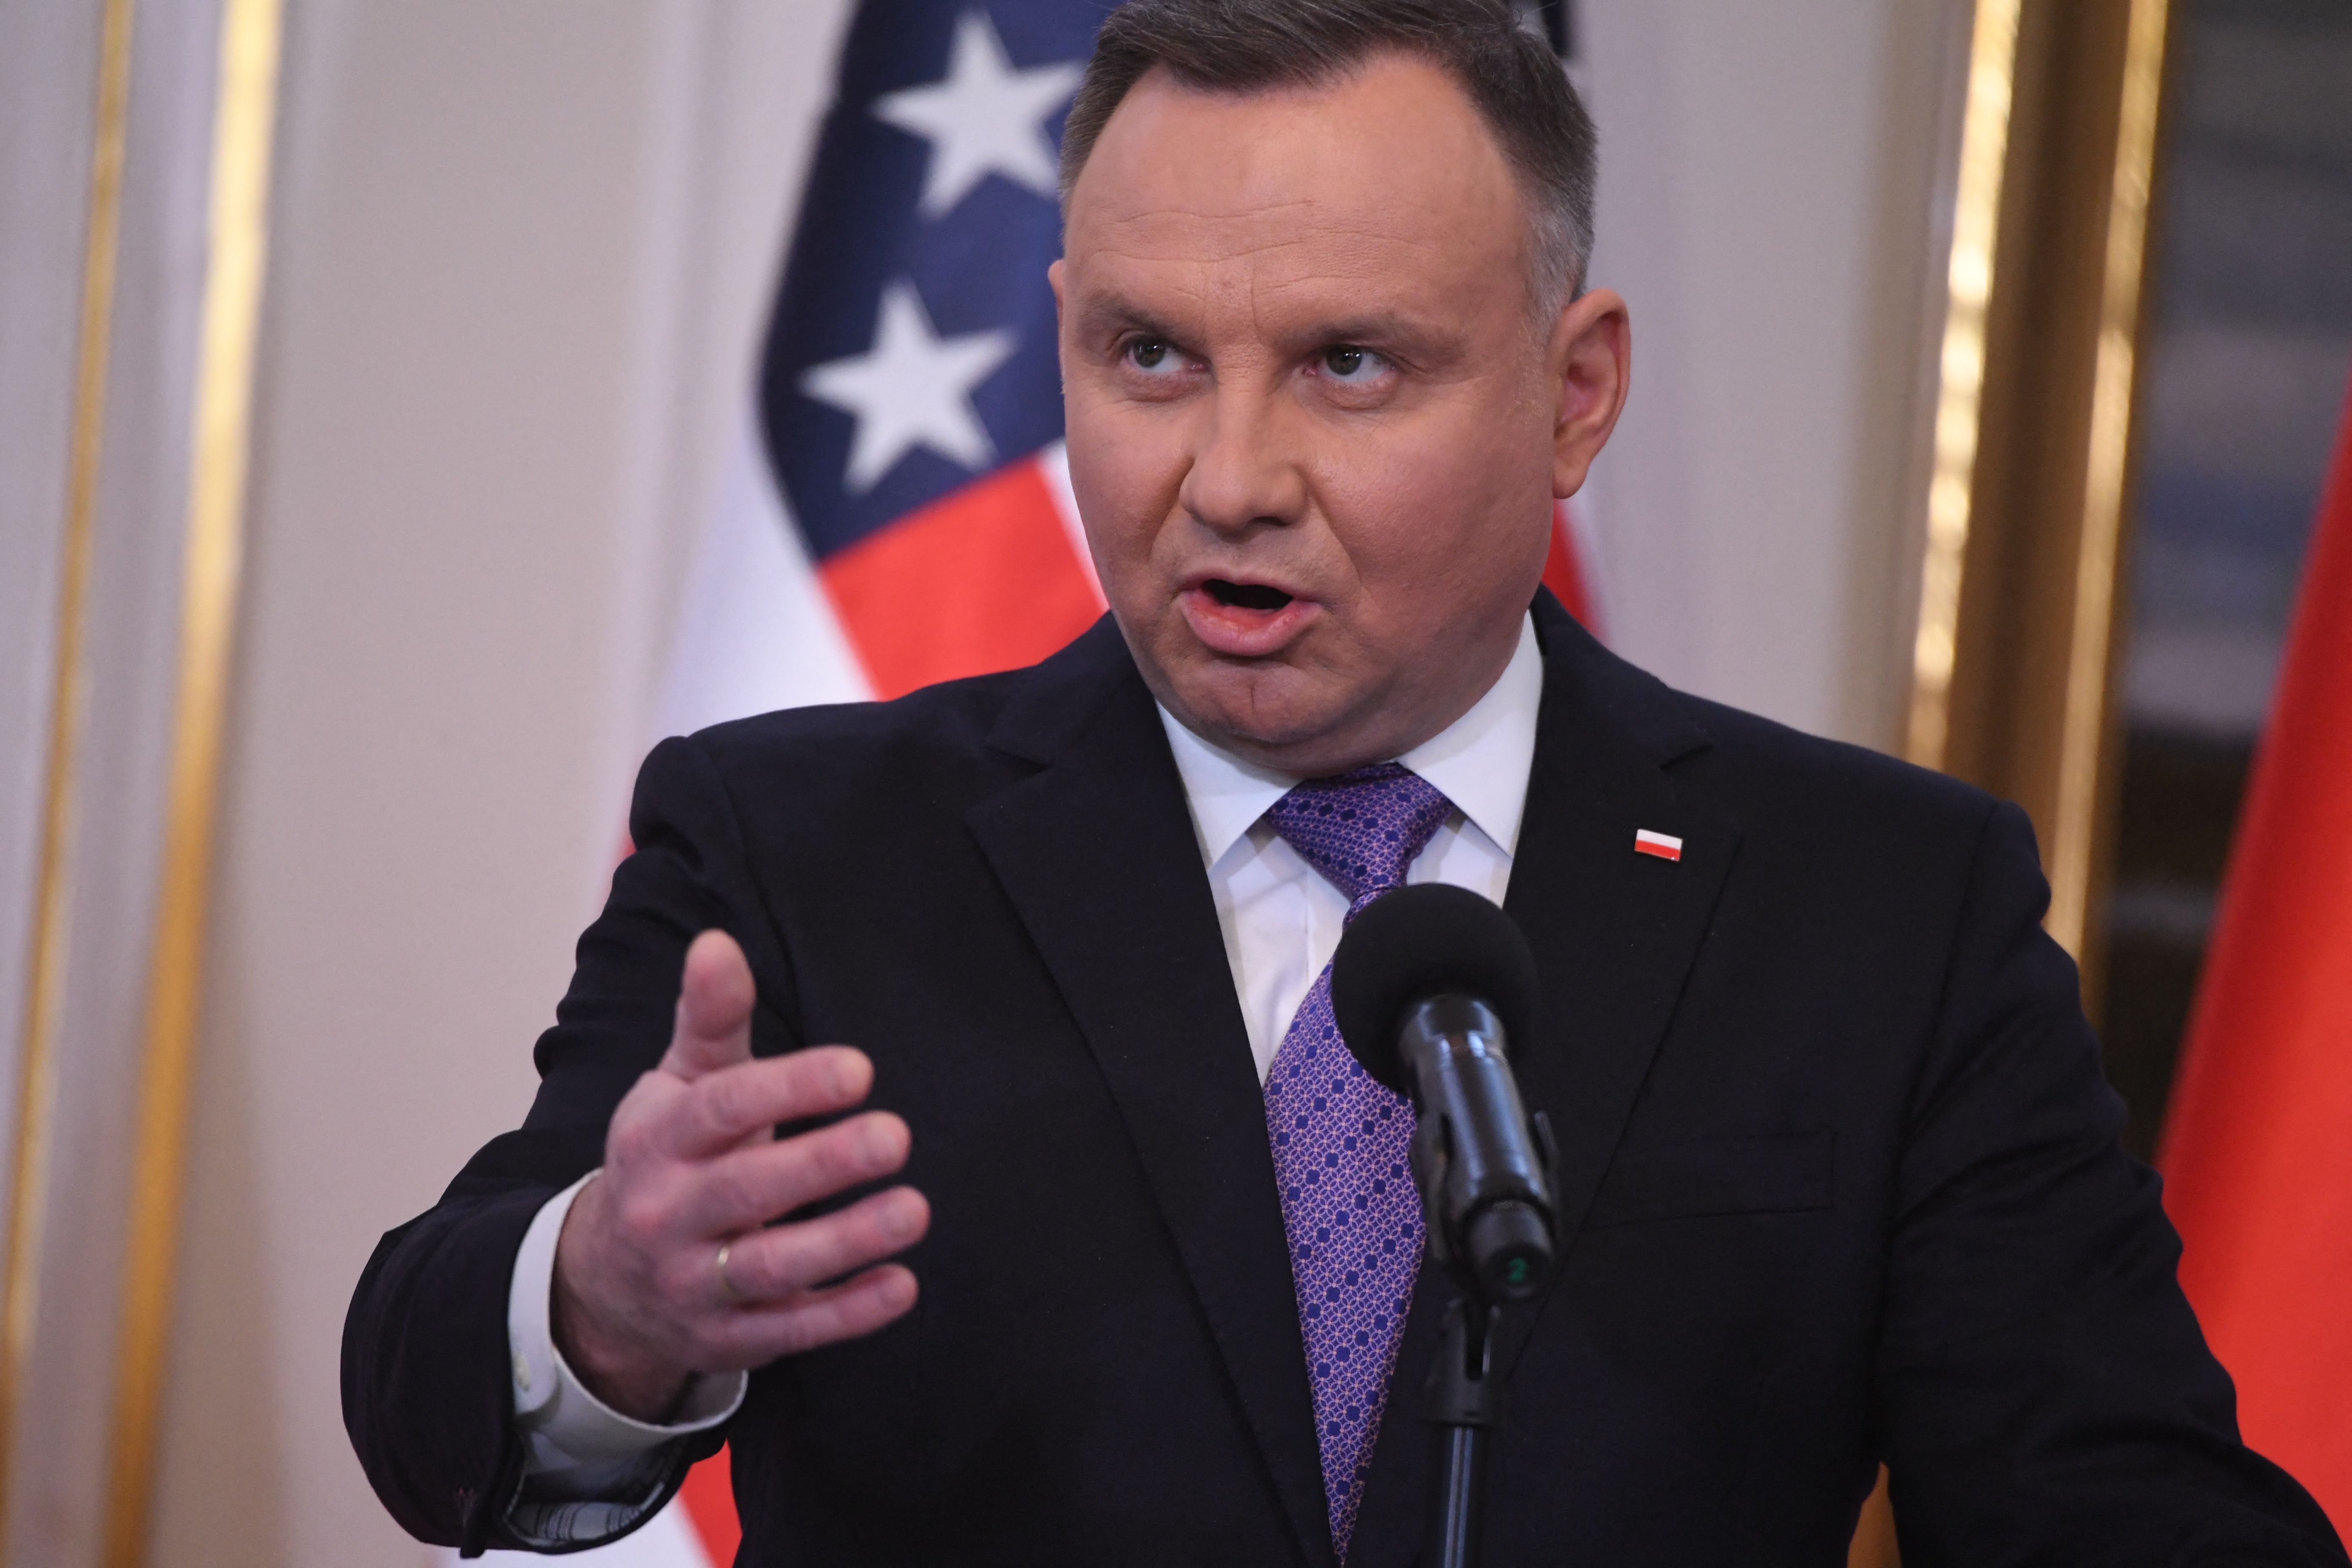 Polish President Andrzej Duda speaks during a press conference with the US Vice President at Belwelder Palace in Warsaw, Poland, on March 10.